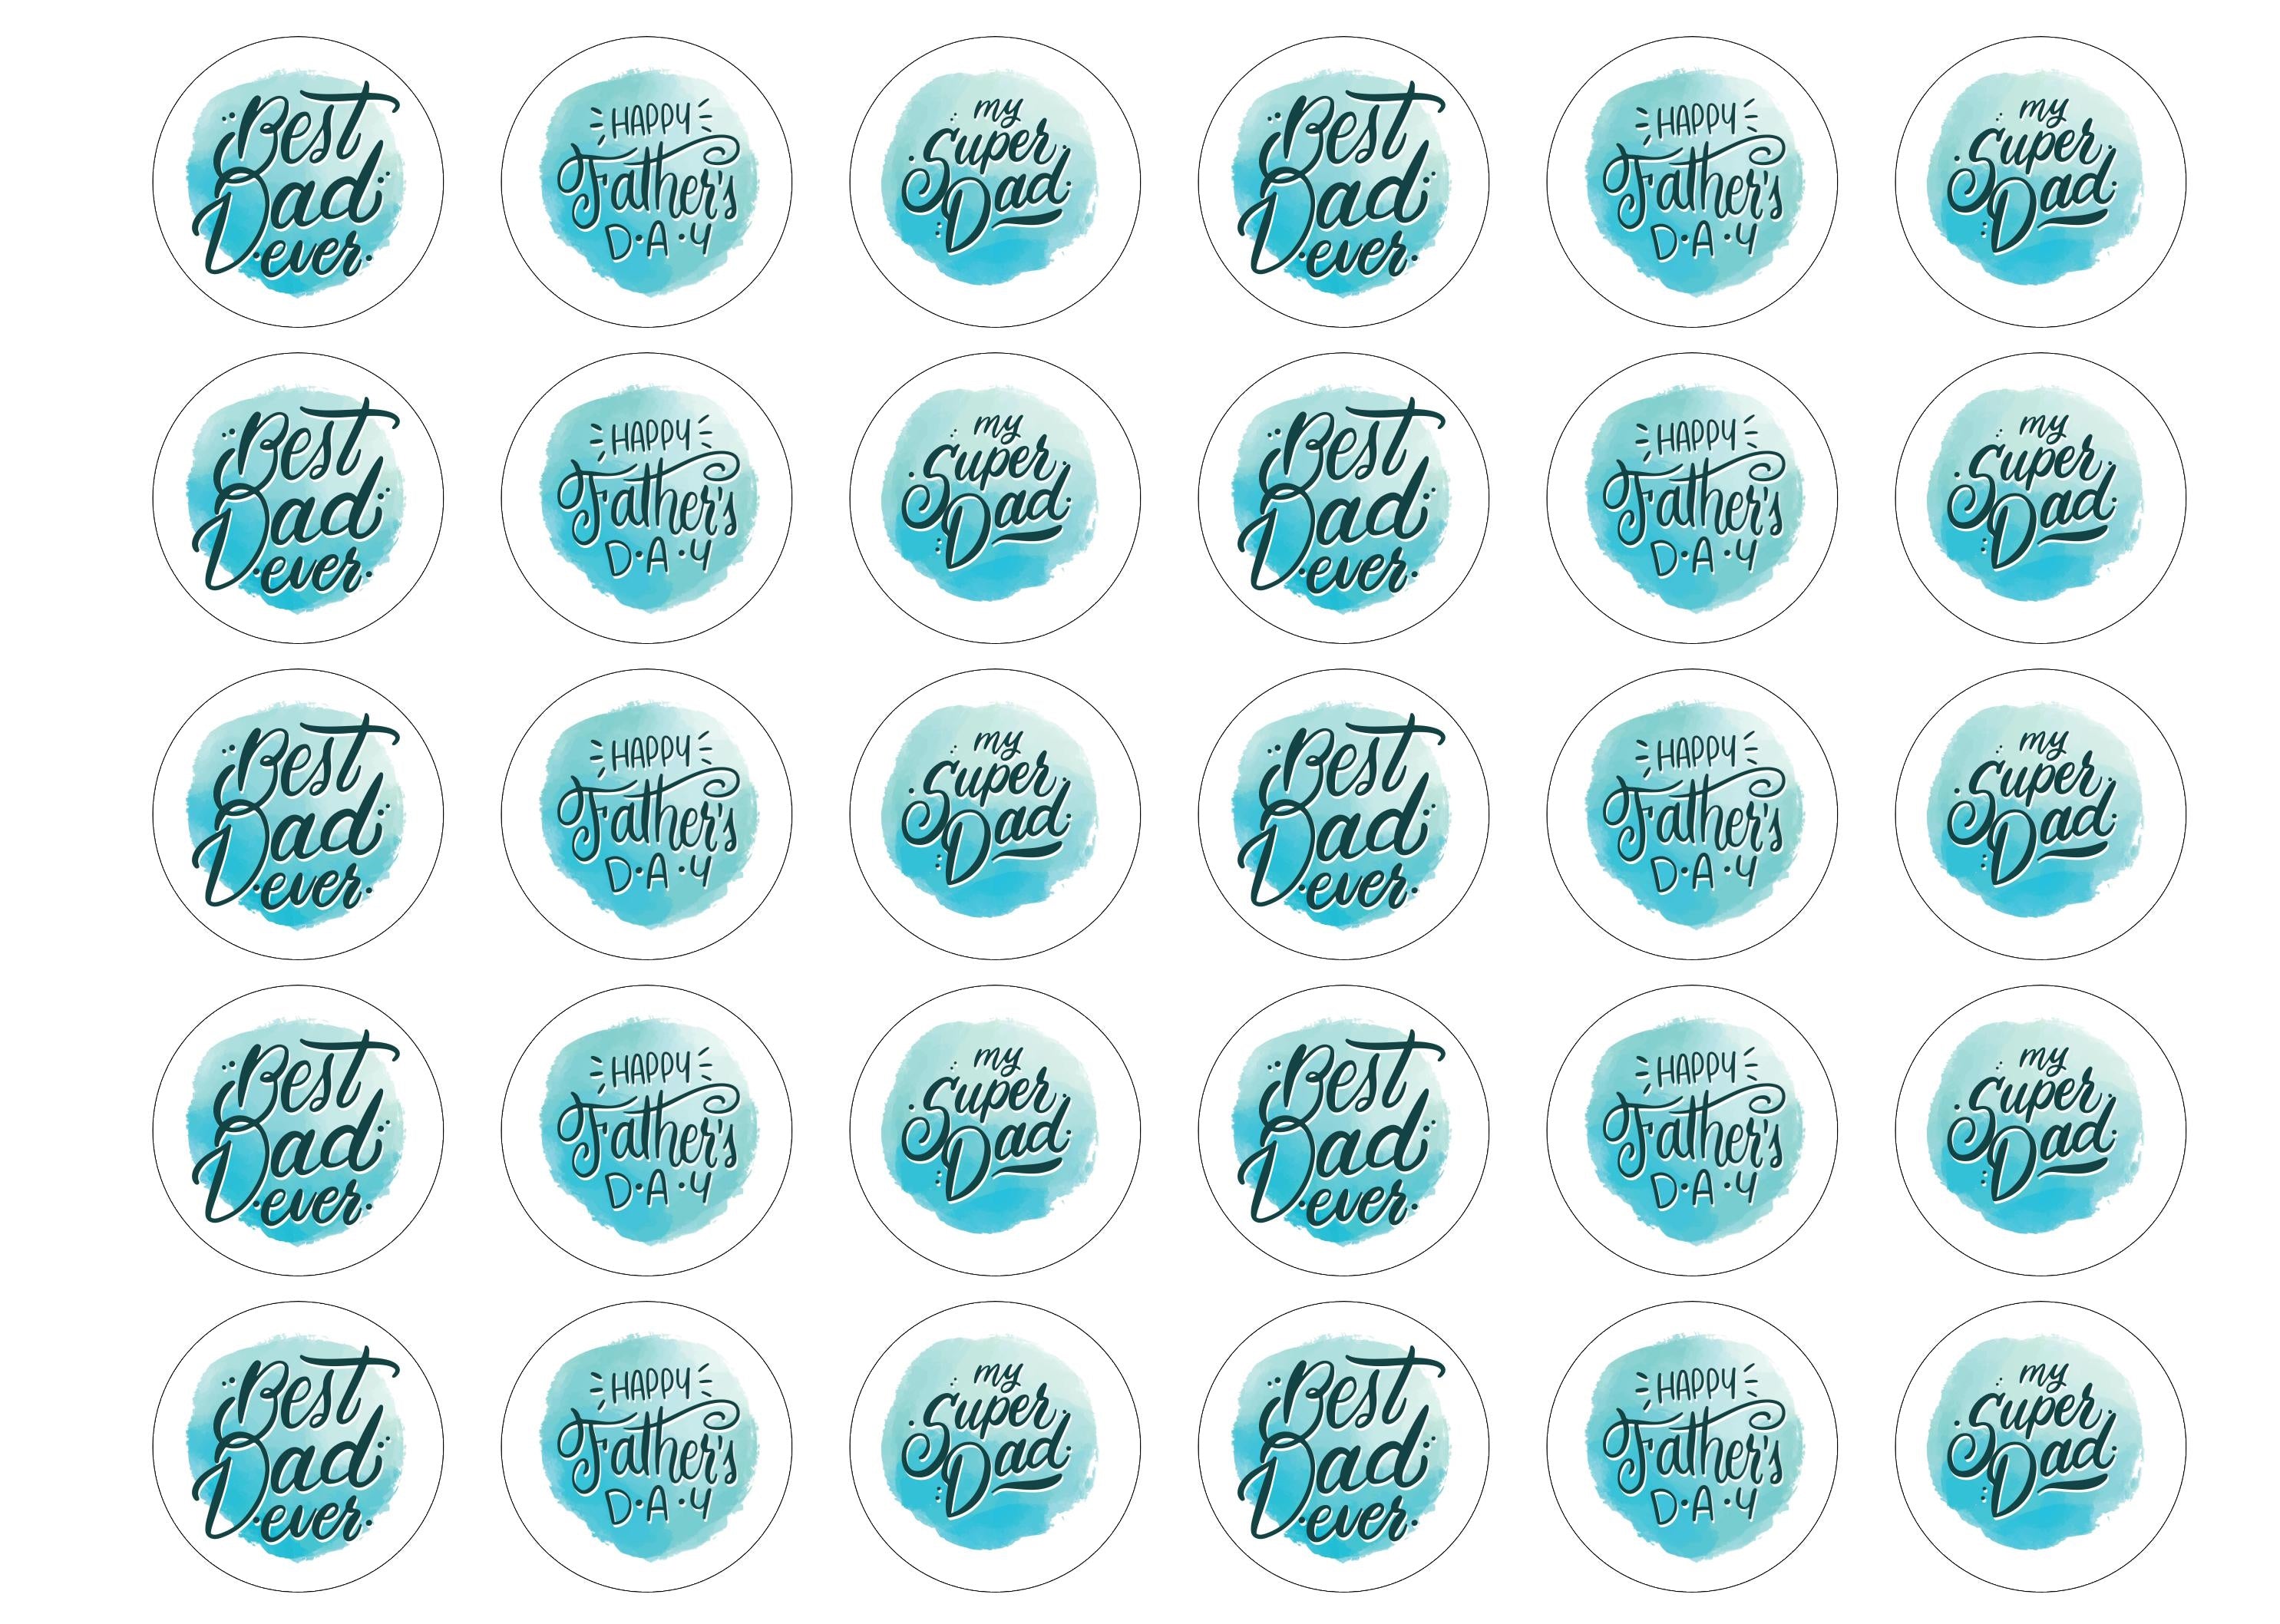 30 printed cupcake toppers in a blue design for Father's Day